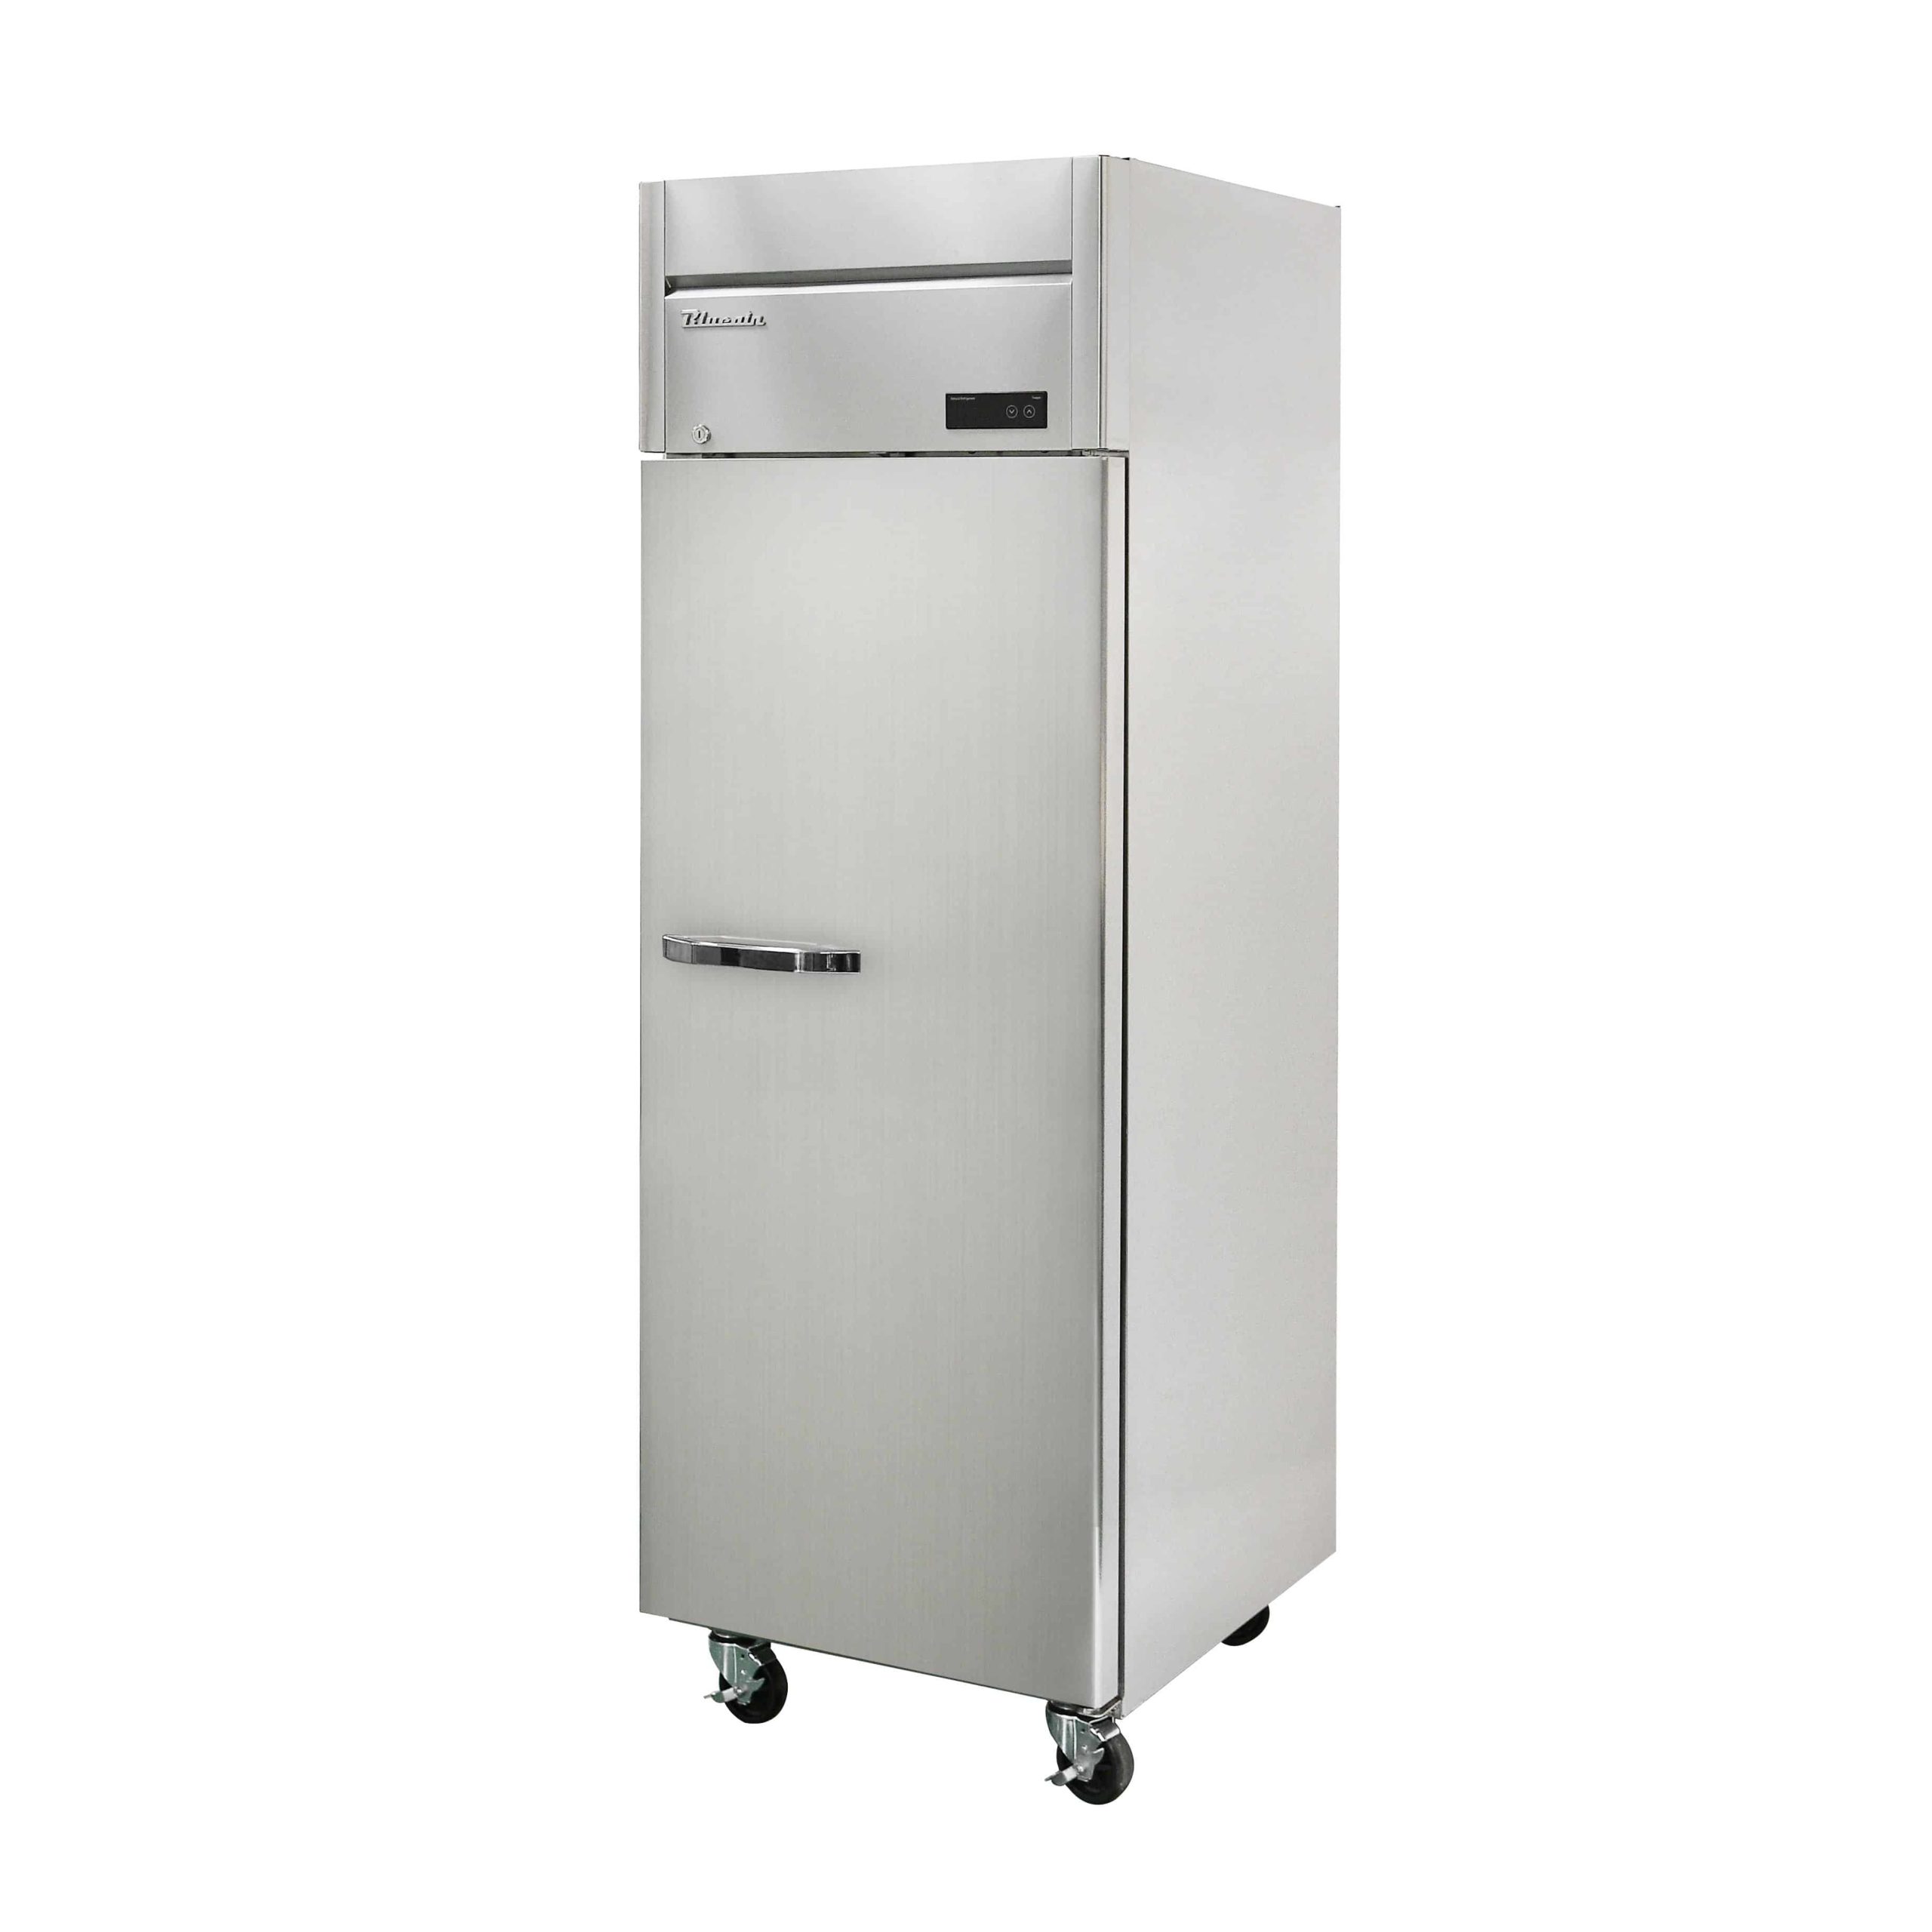 BLUE AIR REACH IN FREEZER, ONE  SECTION 23 CU FT CAPACITY, TOP 